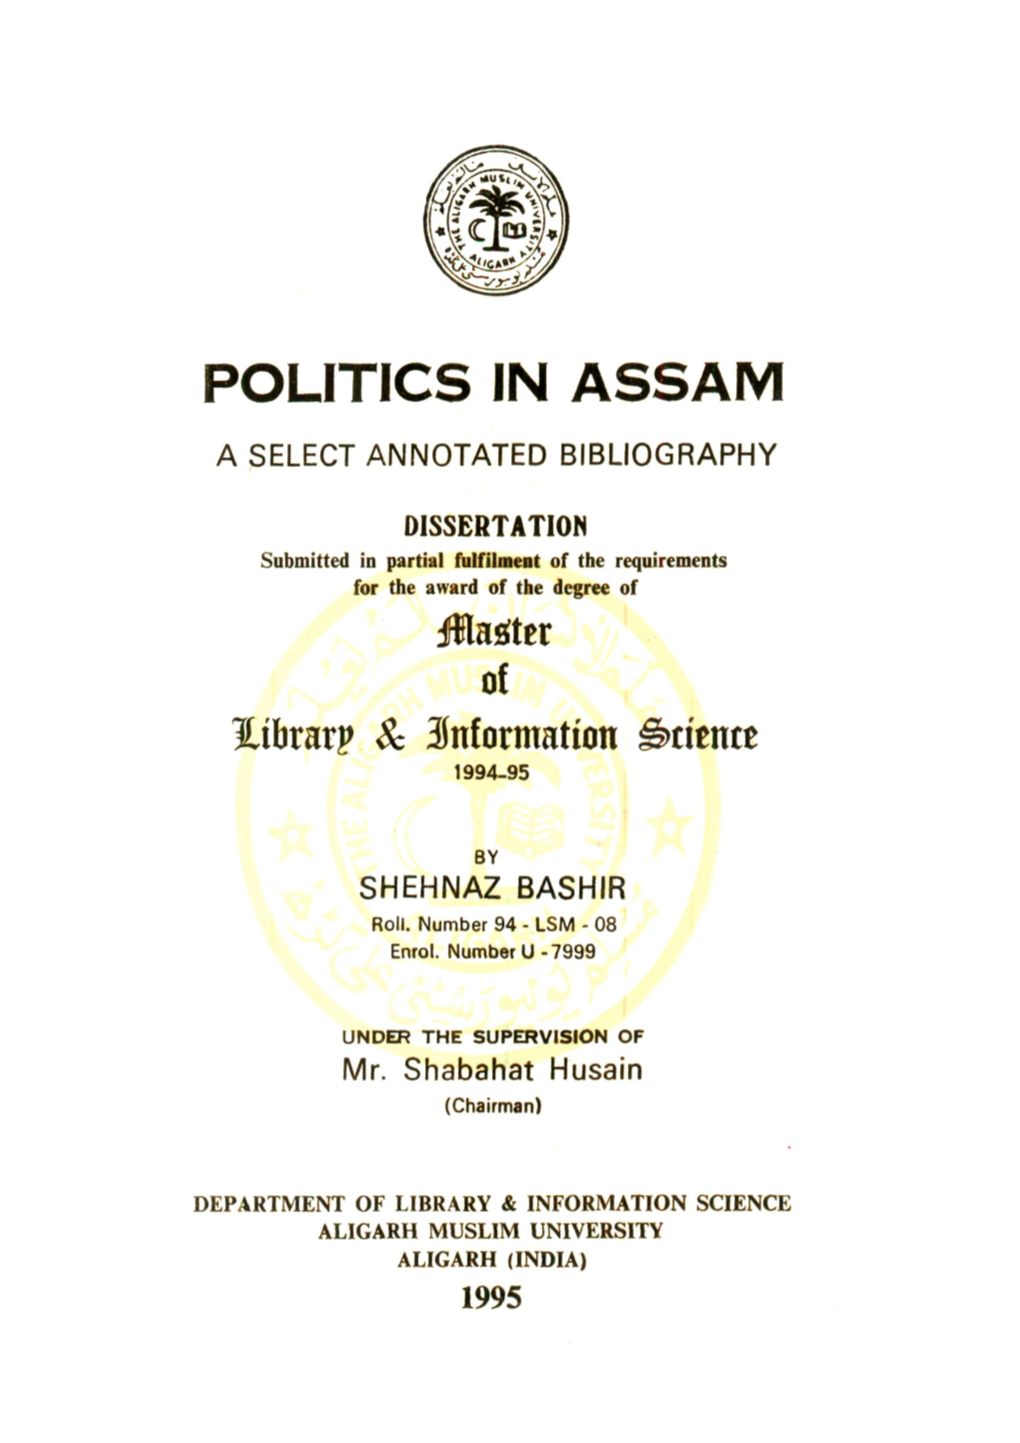 Politics in Assam a Select Annotated Bibliography